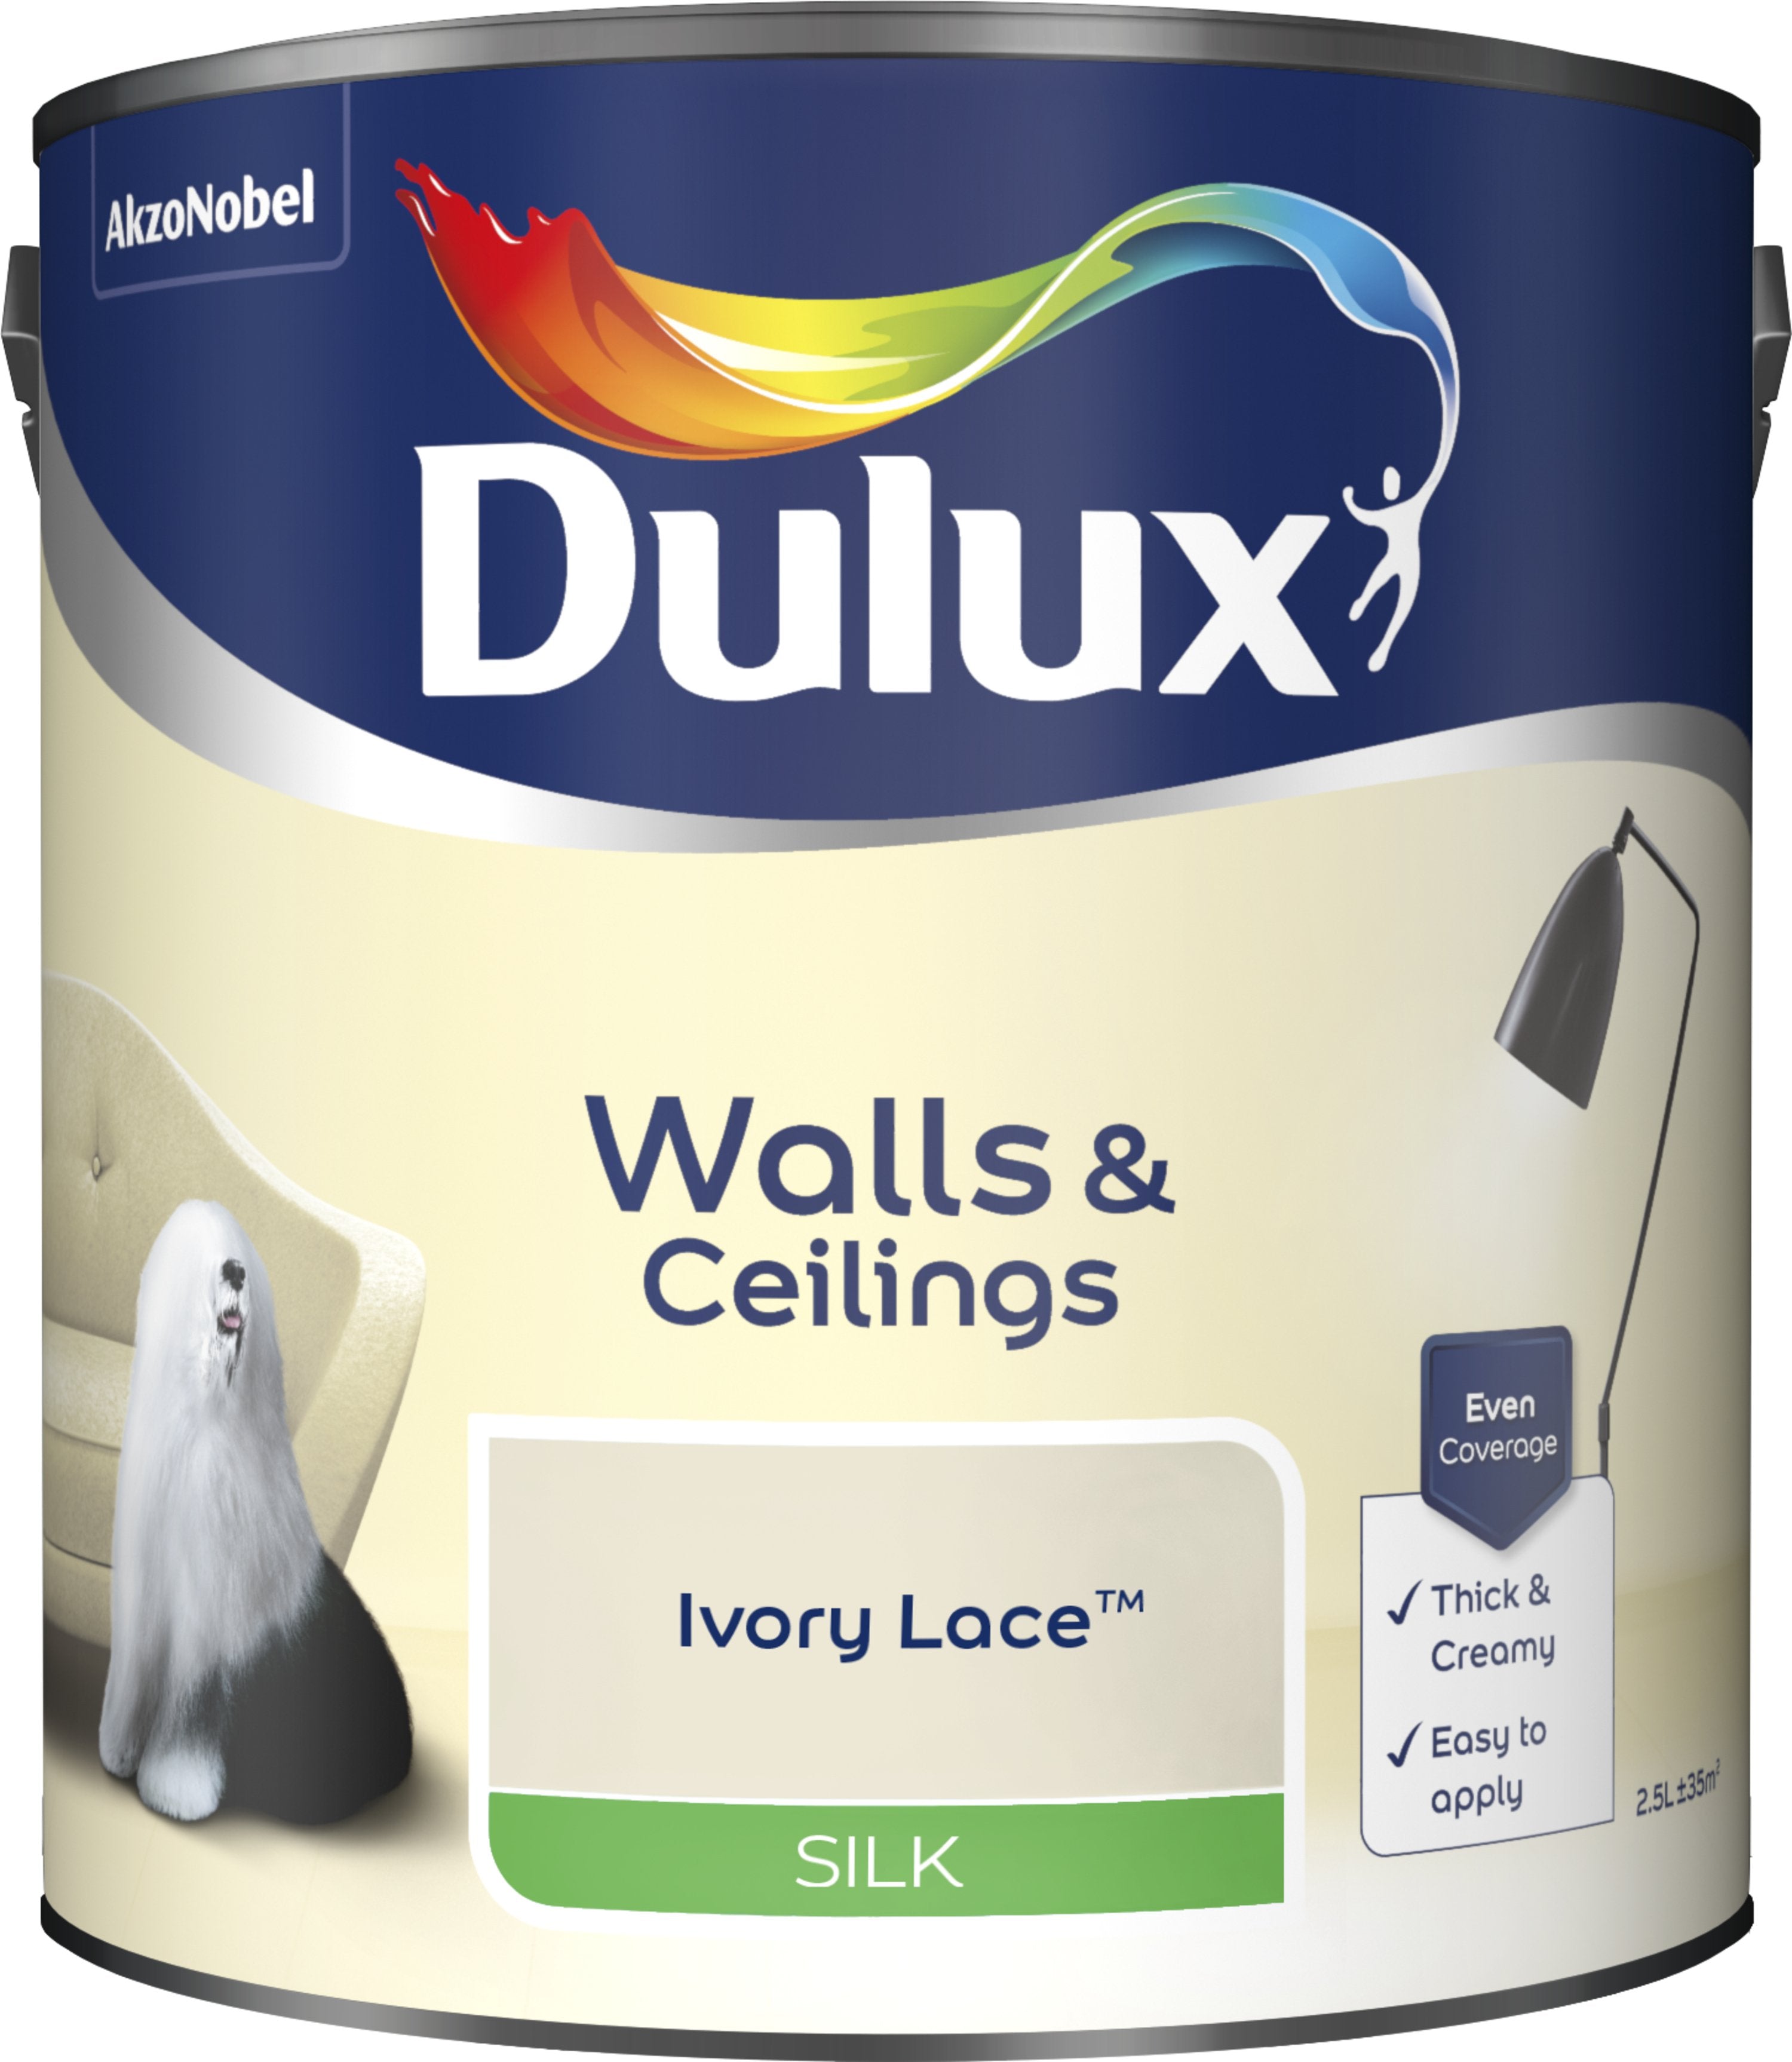 Dulux Silk Emulsion Paint For Walls And Ceilings - Ivory Lace 2.5L Garden & Diy  Home Improvements  